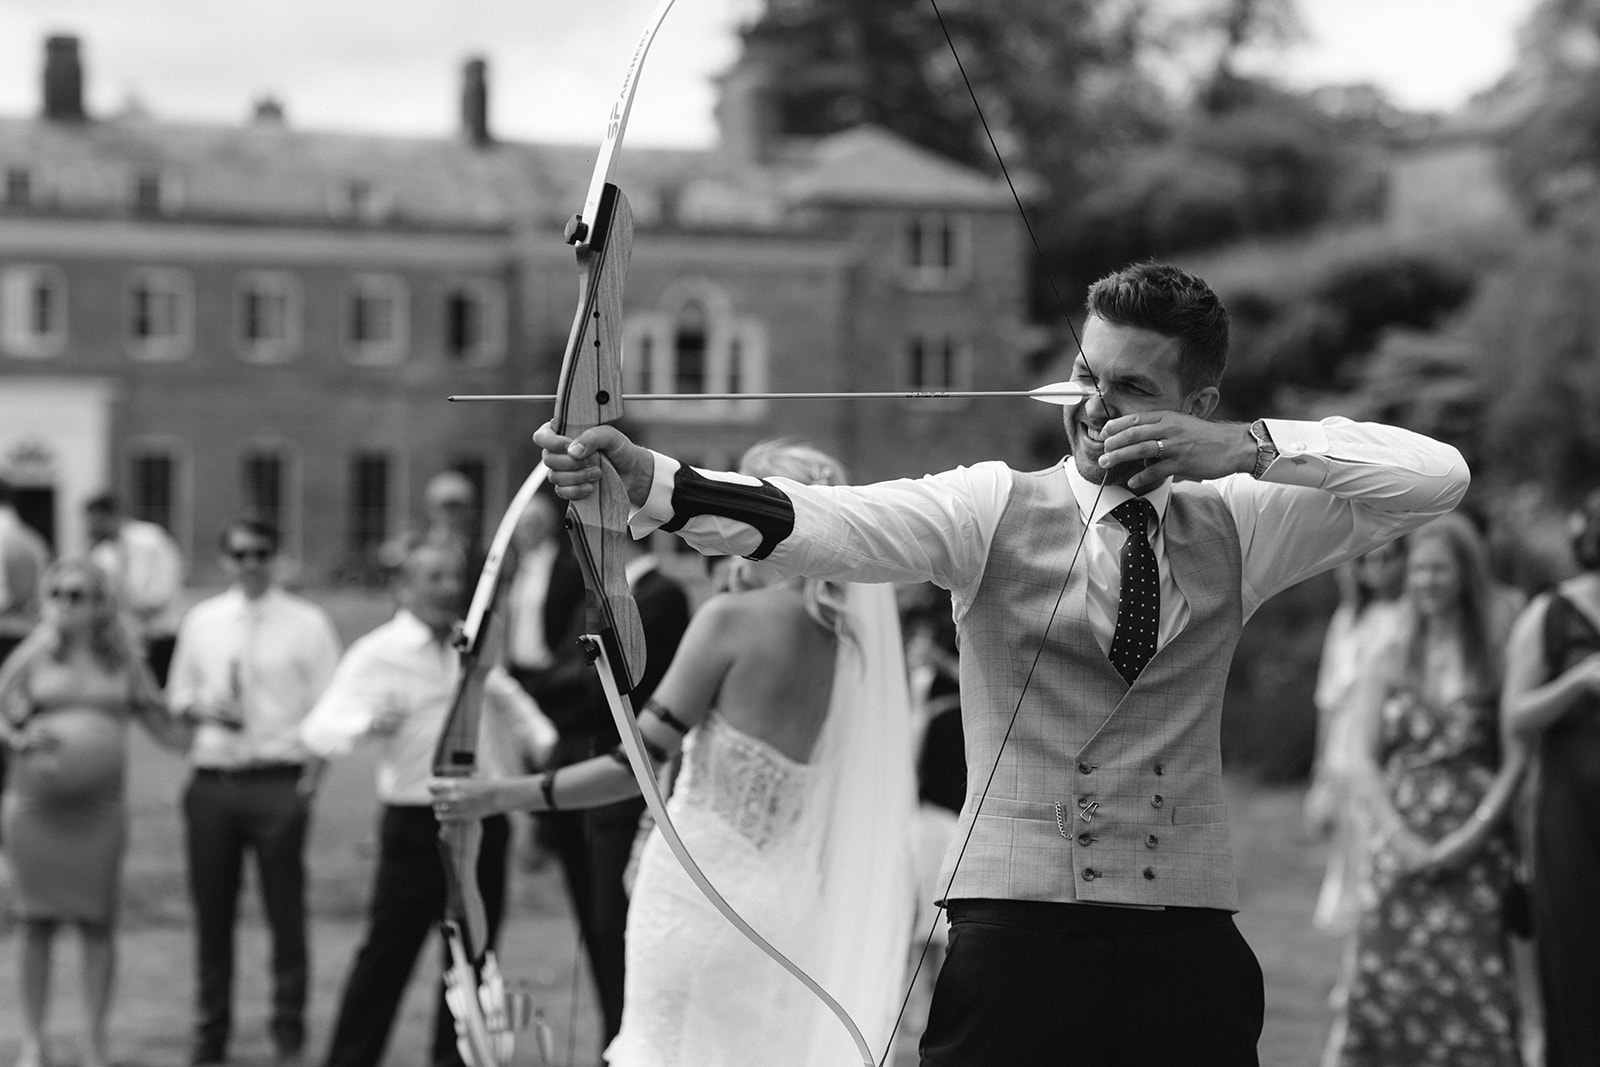 Archery for You